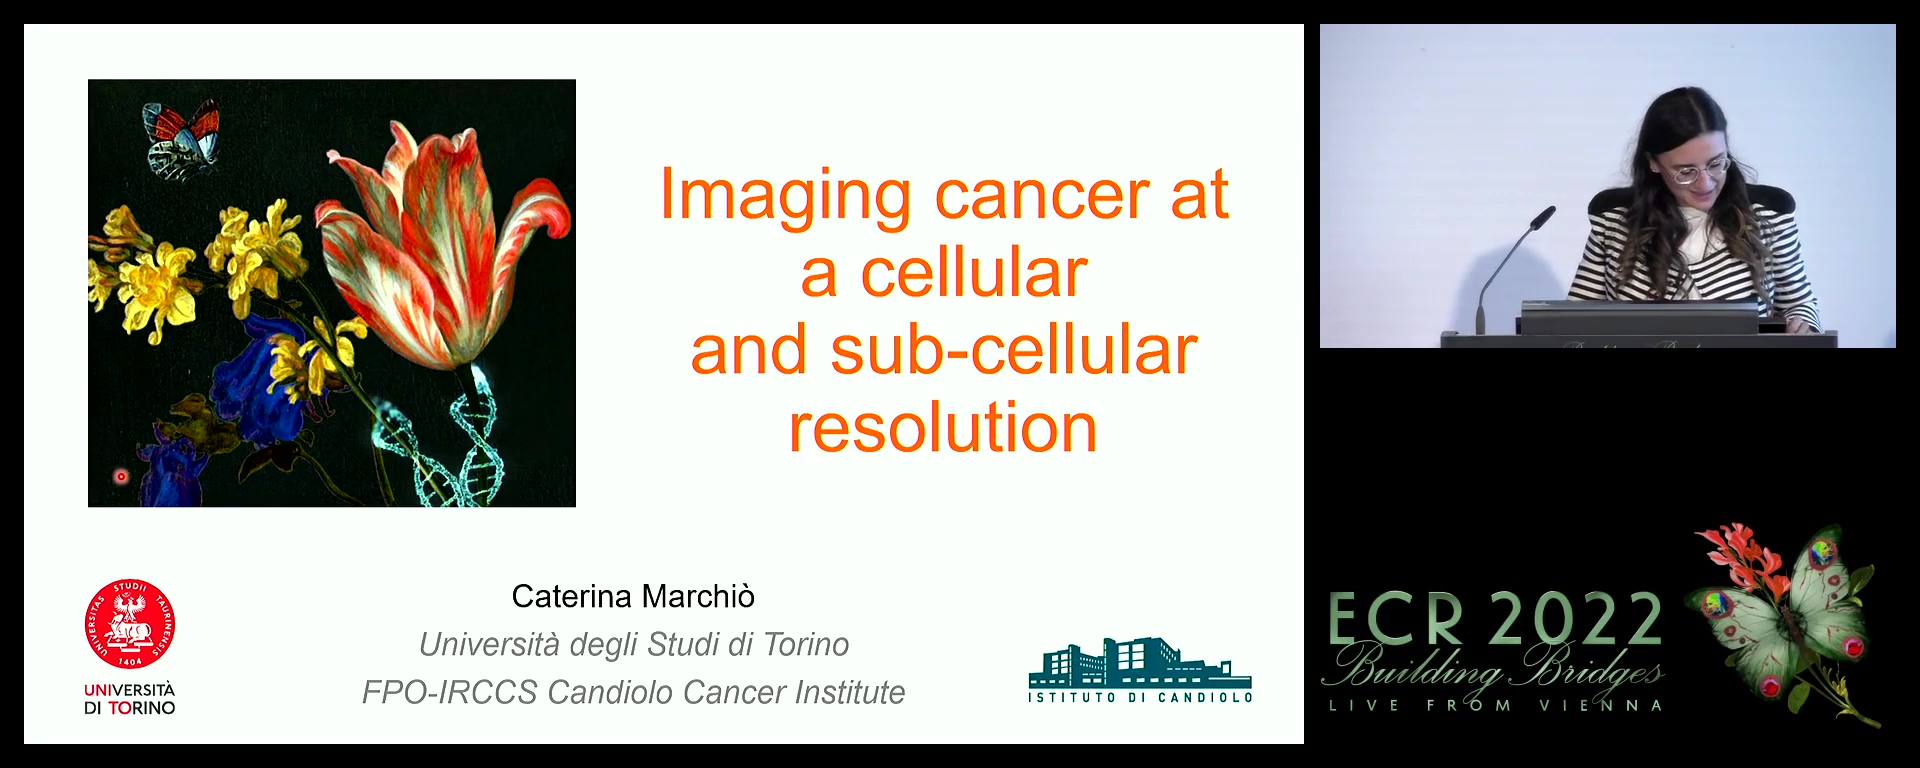 Imaging cancer at a cellular and sub-cellular resolution